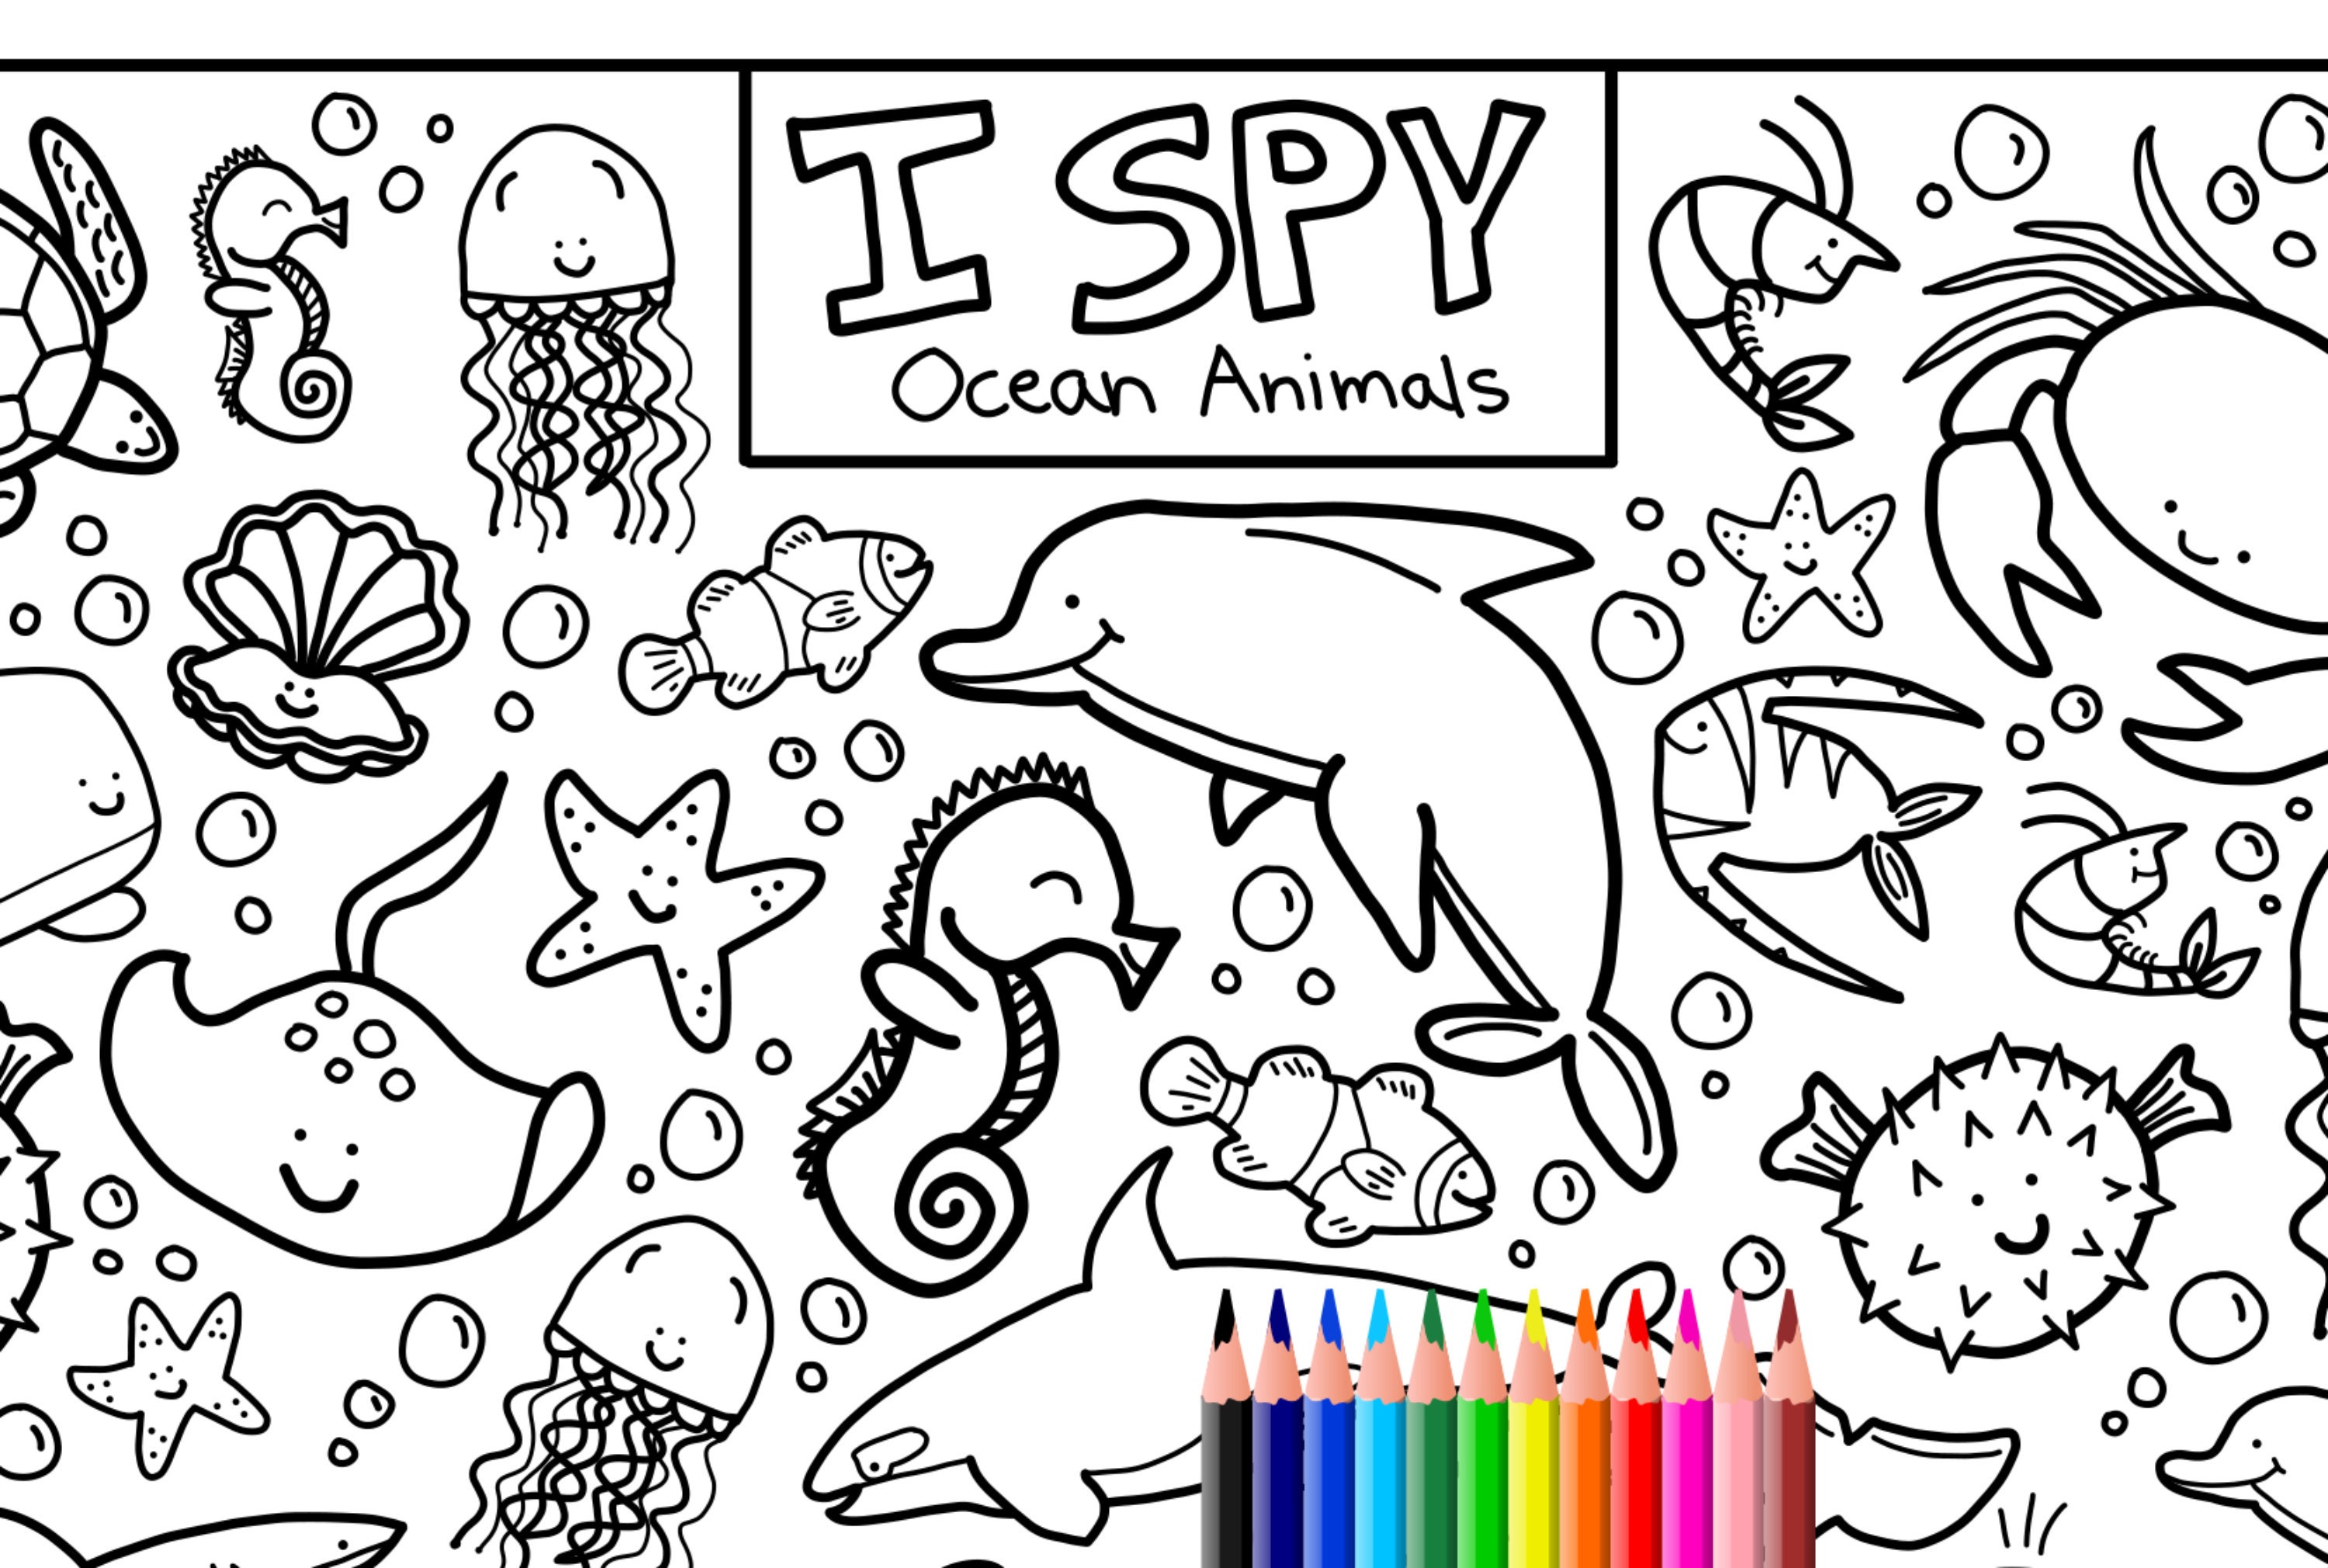 I Spy Ocean Animals Coloring Page Printable Download - Etsy UK